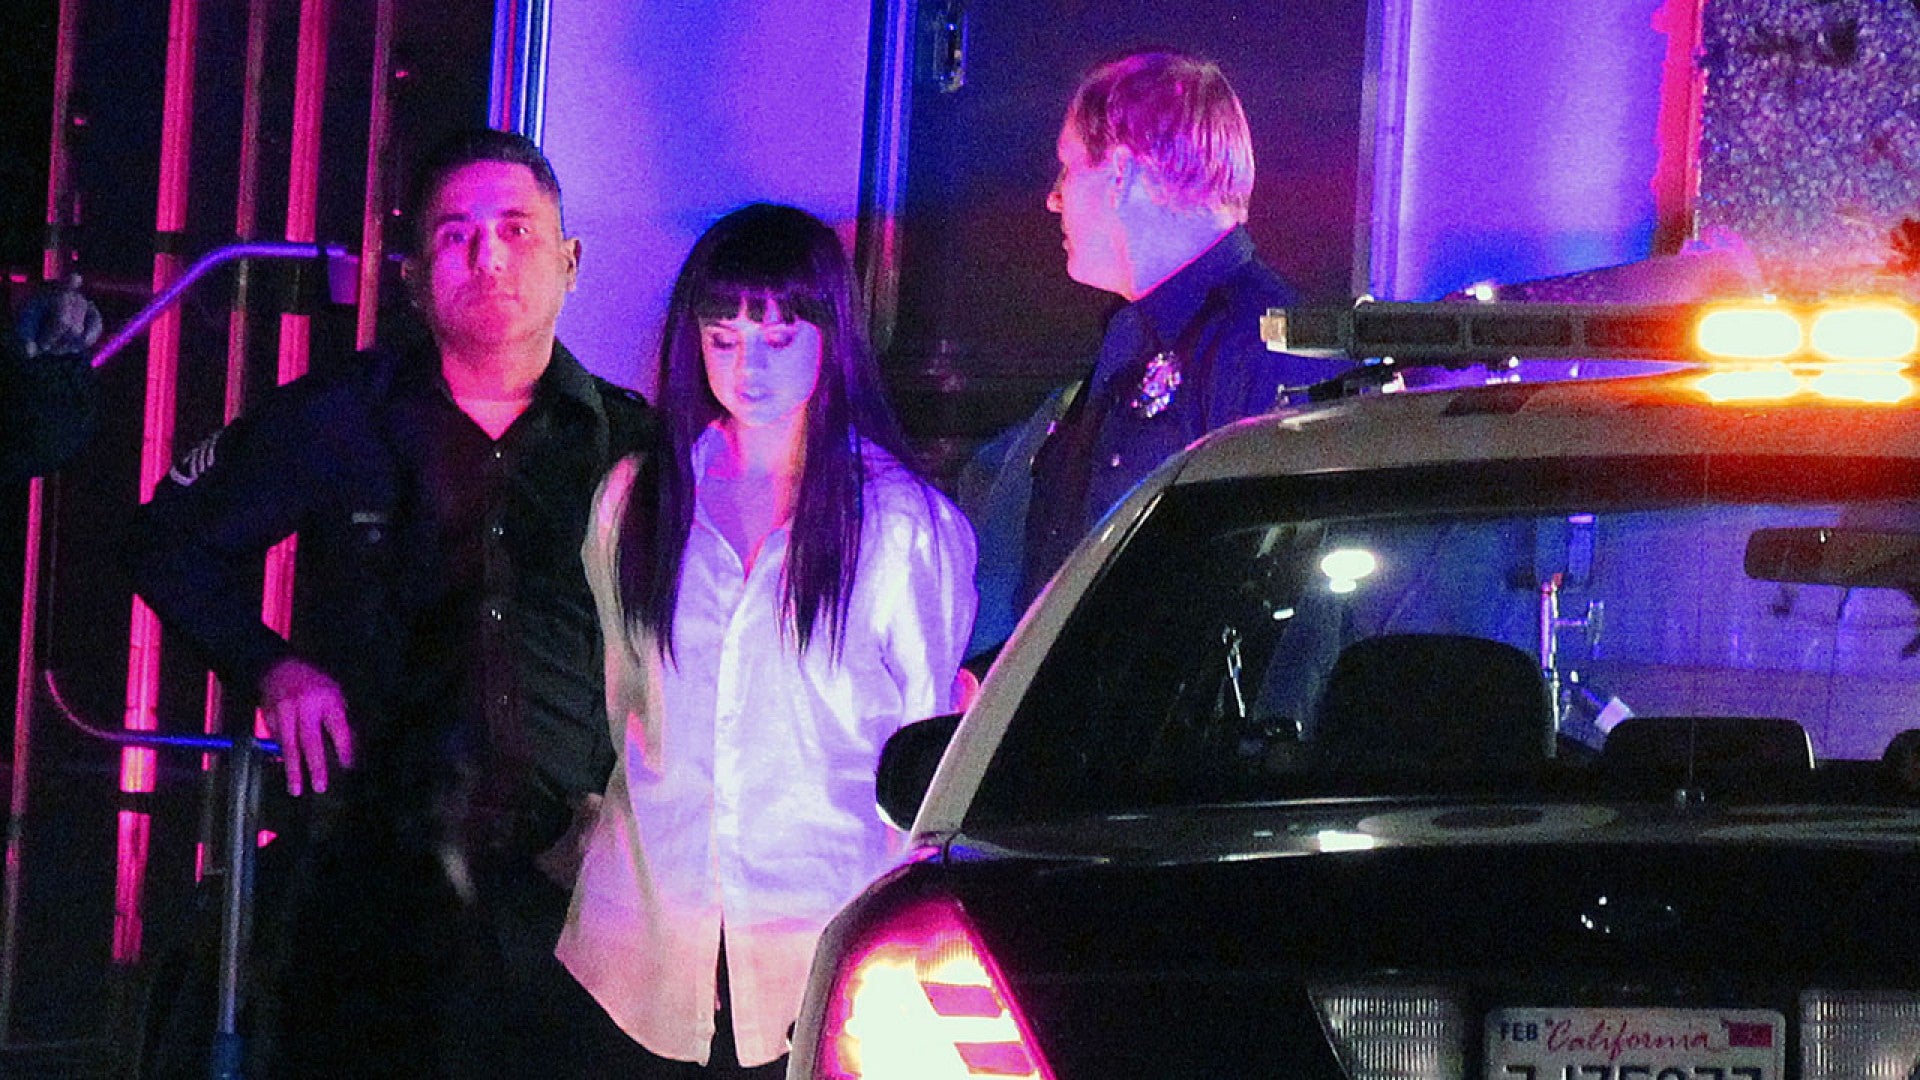 Exclusive Watch Selena Gomez Strip Down And Get Arrested On The Set Of Her New Music Video